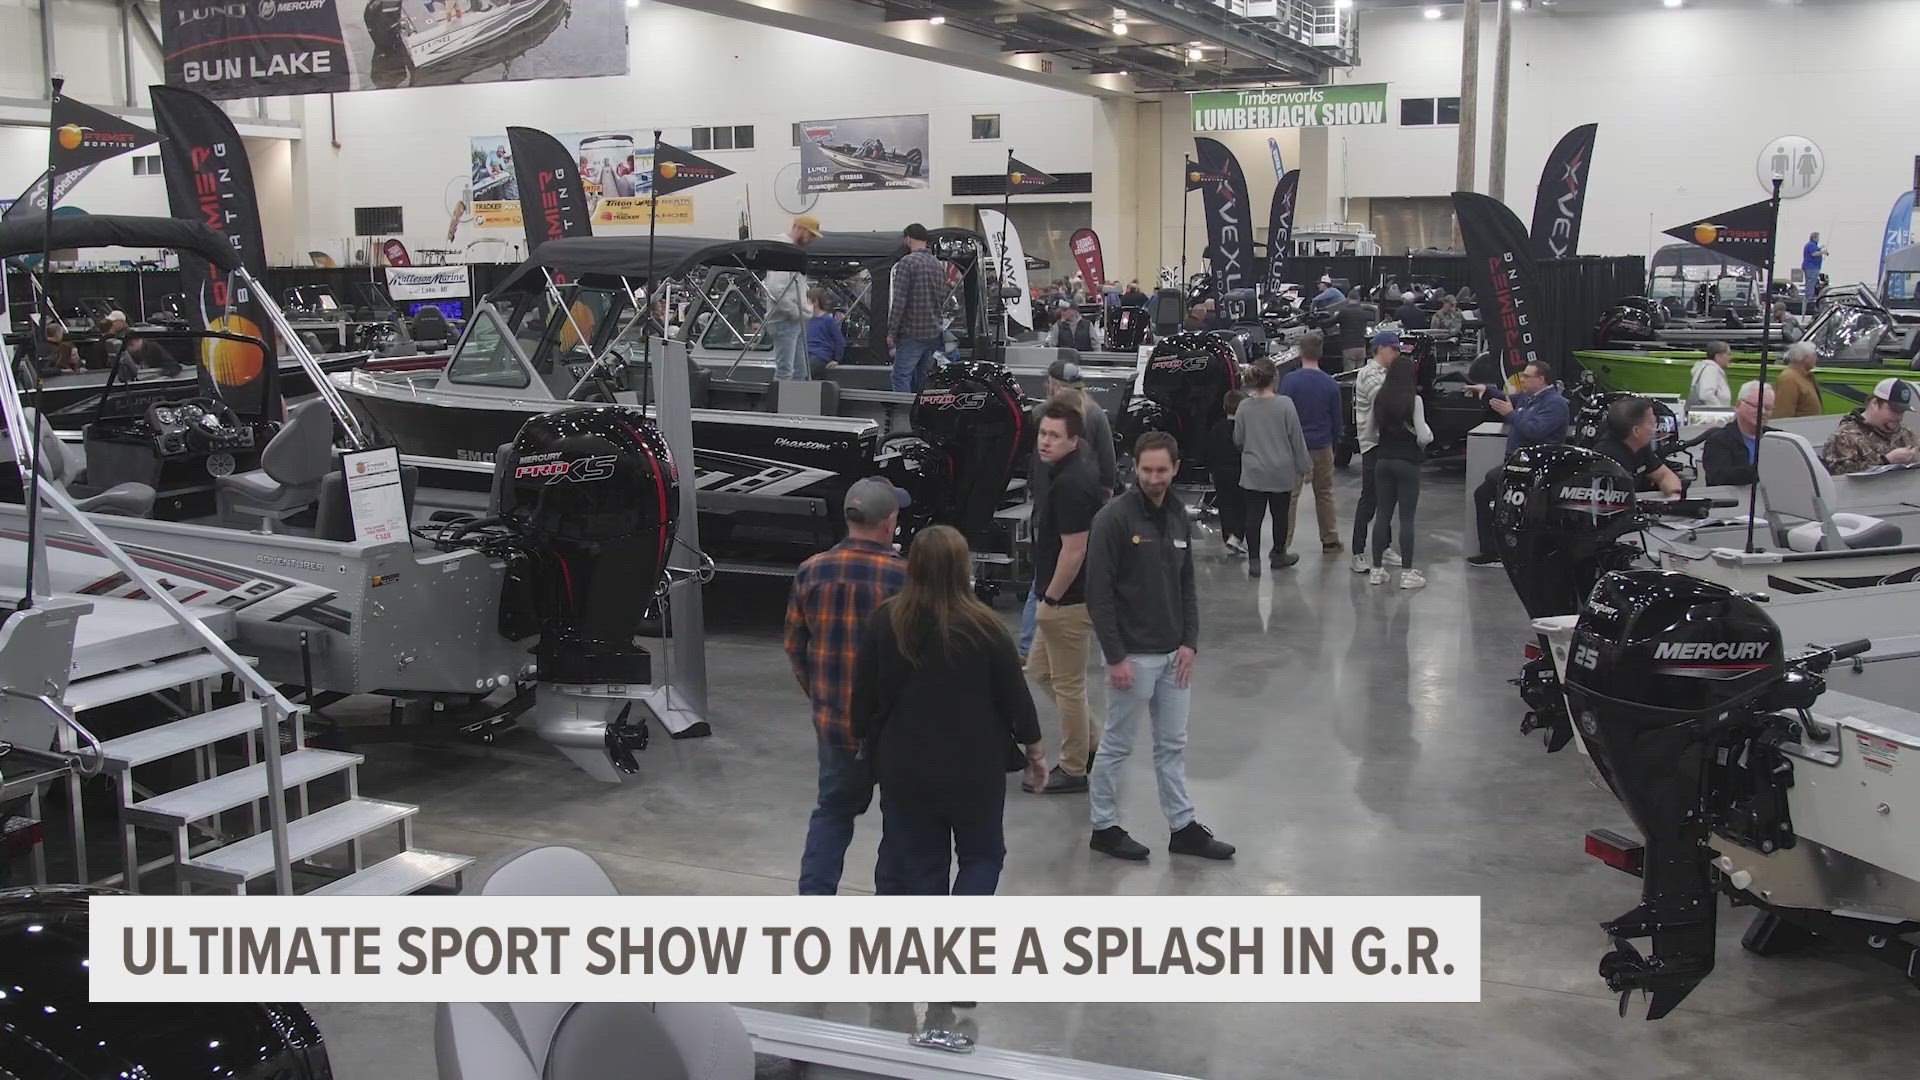 New sportsmen's show celebrates outdoor traditions, News